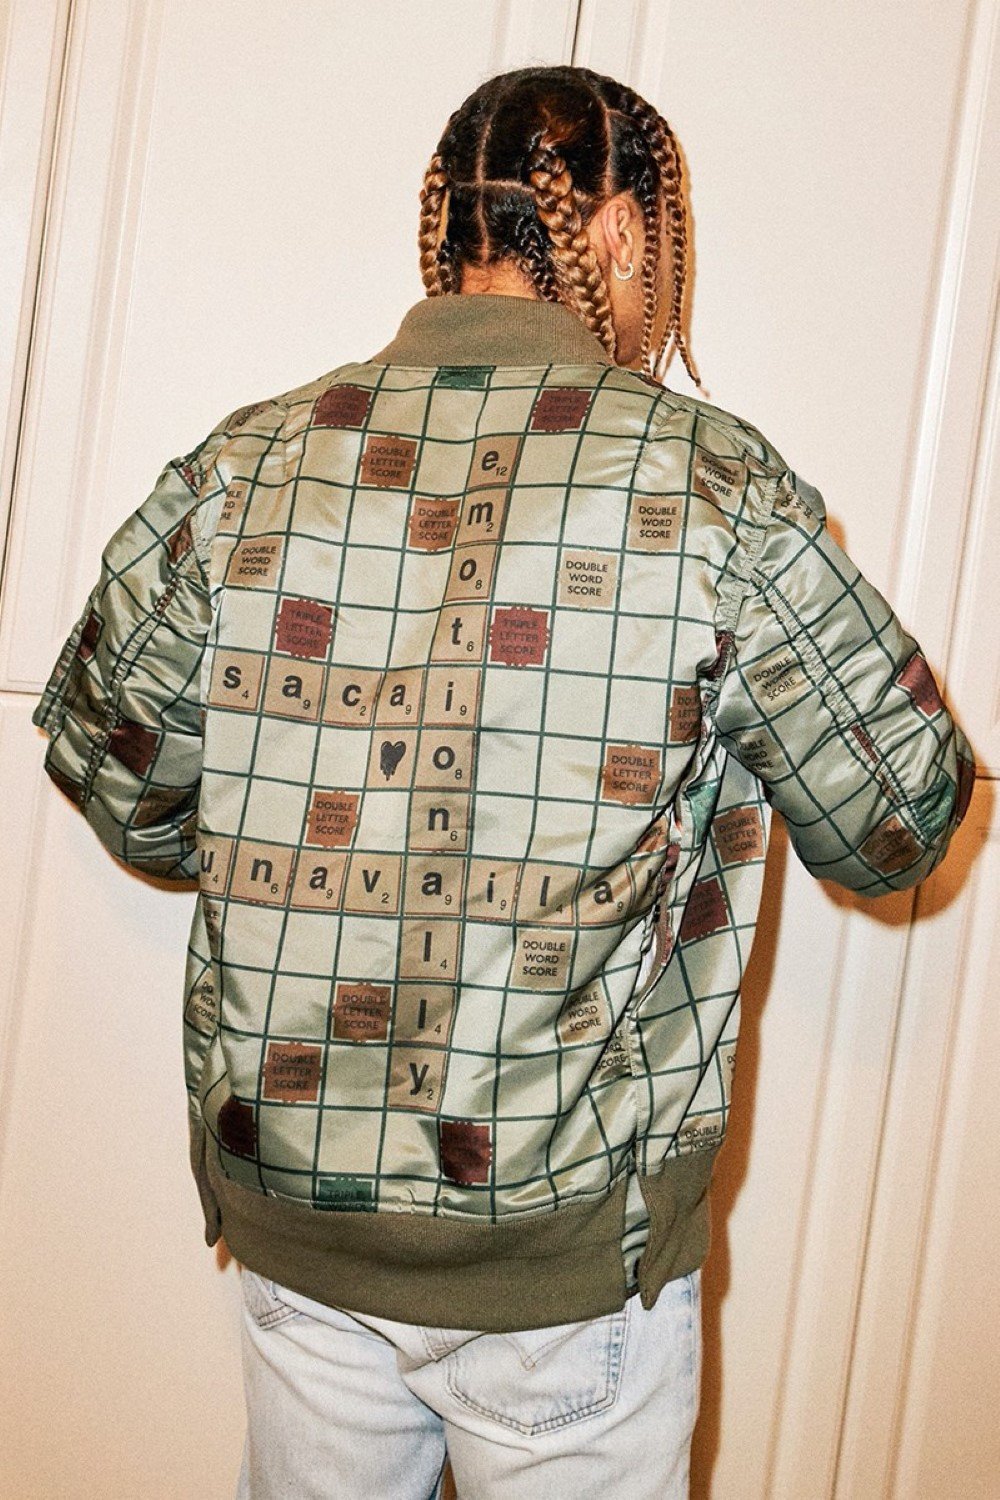 sacai x Emotionally Unavailable - Collection Scrabble